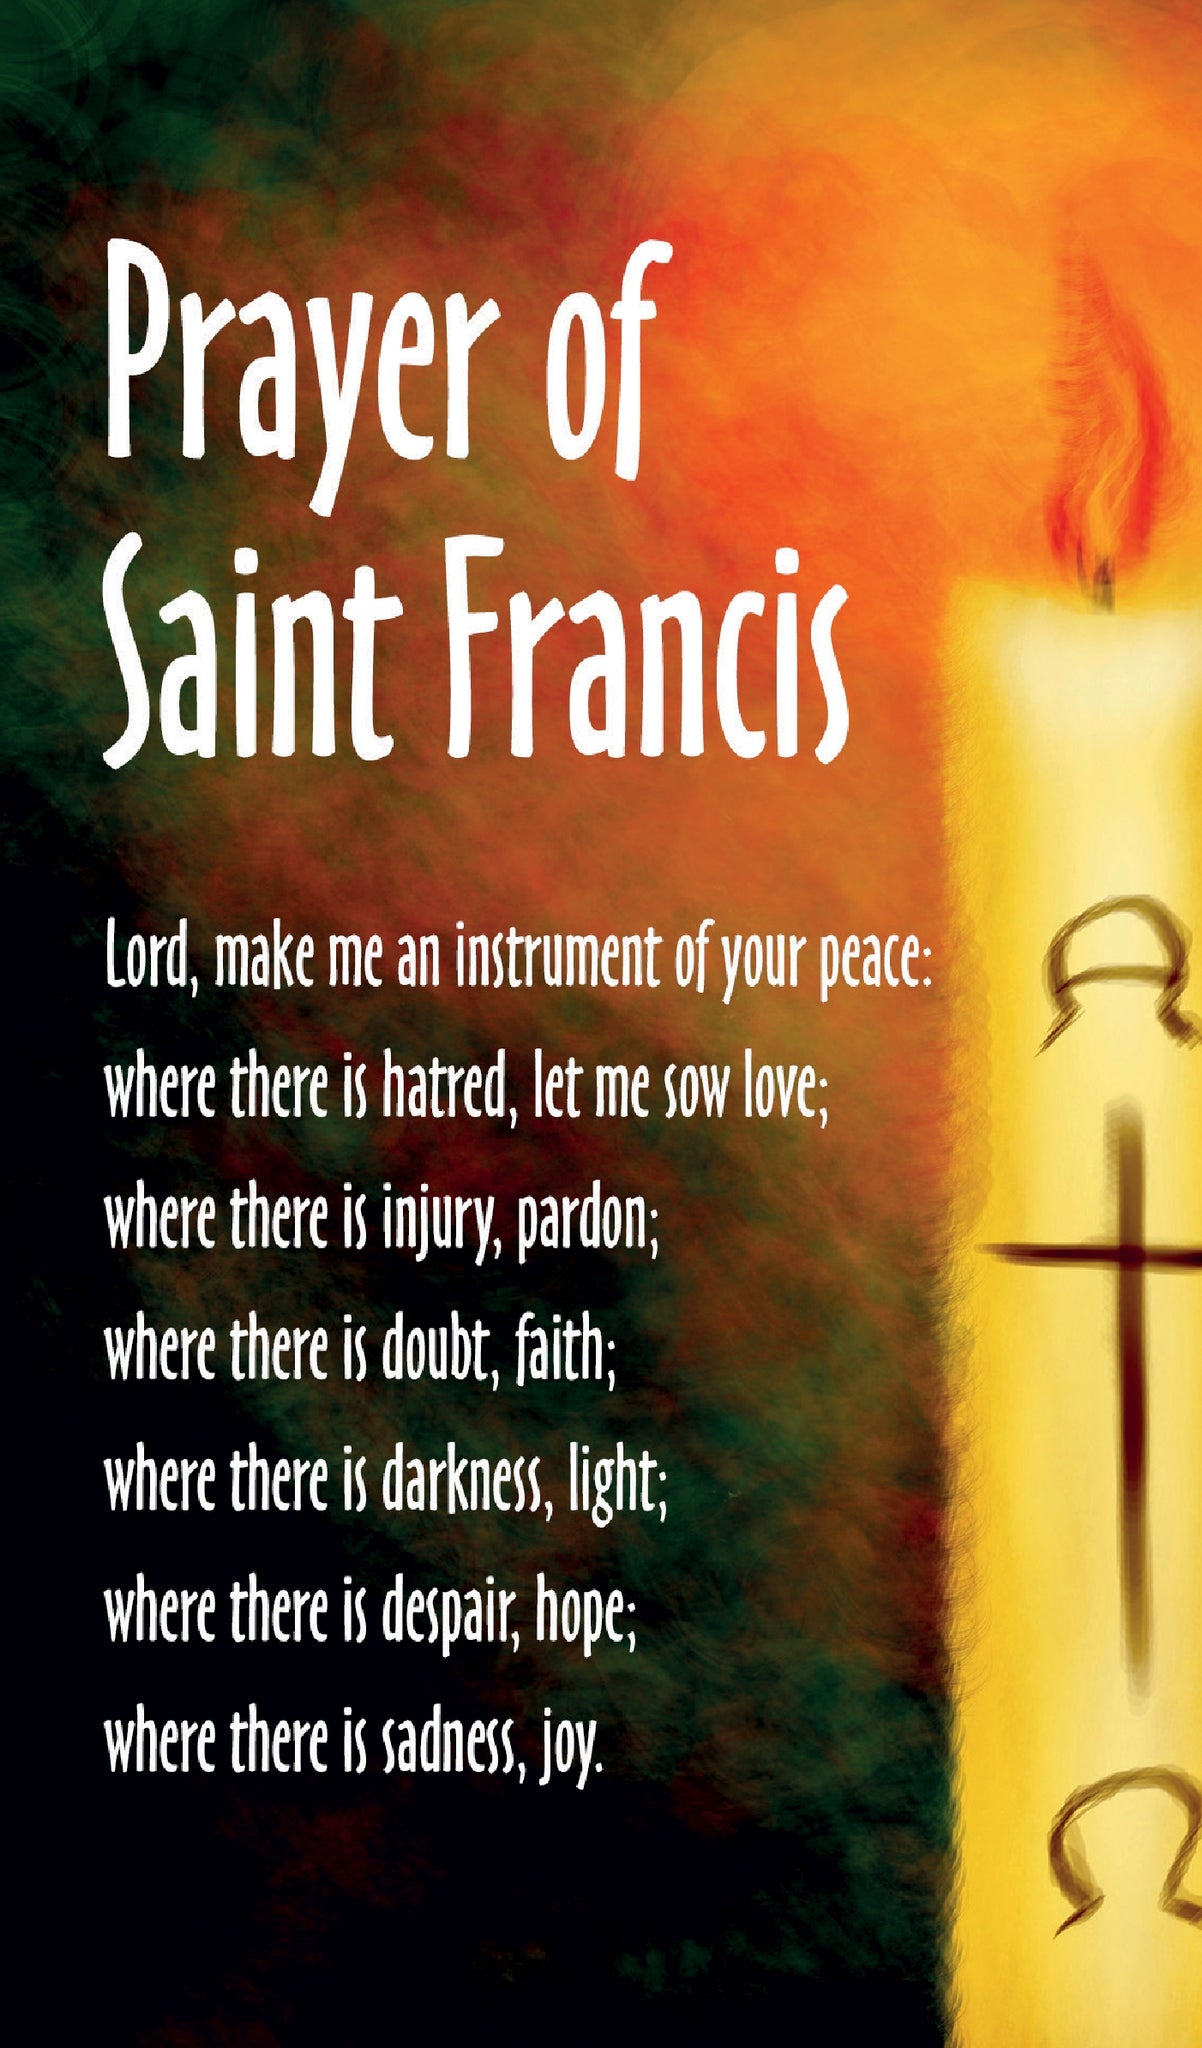 St Francis - Prayer Card New For 2019St Francis - Prayer Card New For 2019